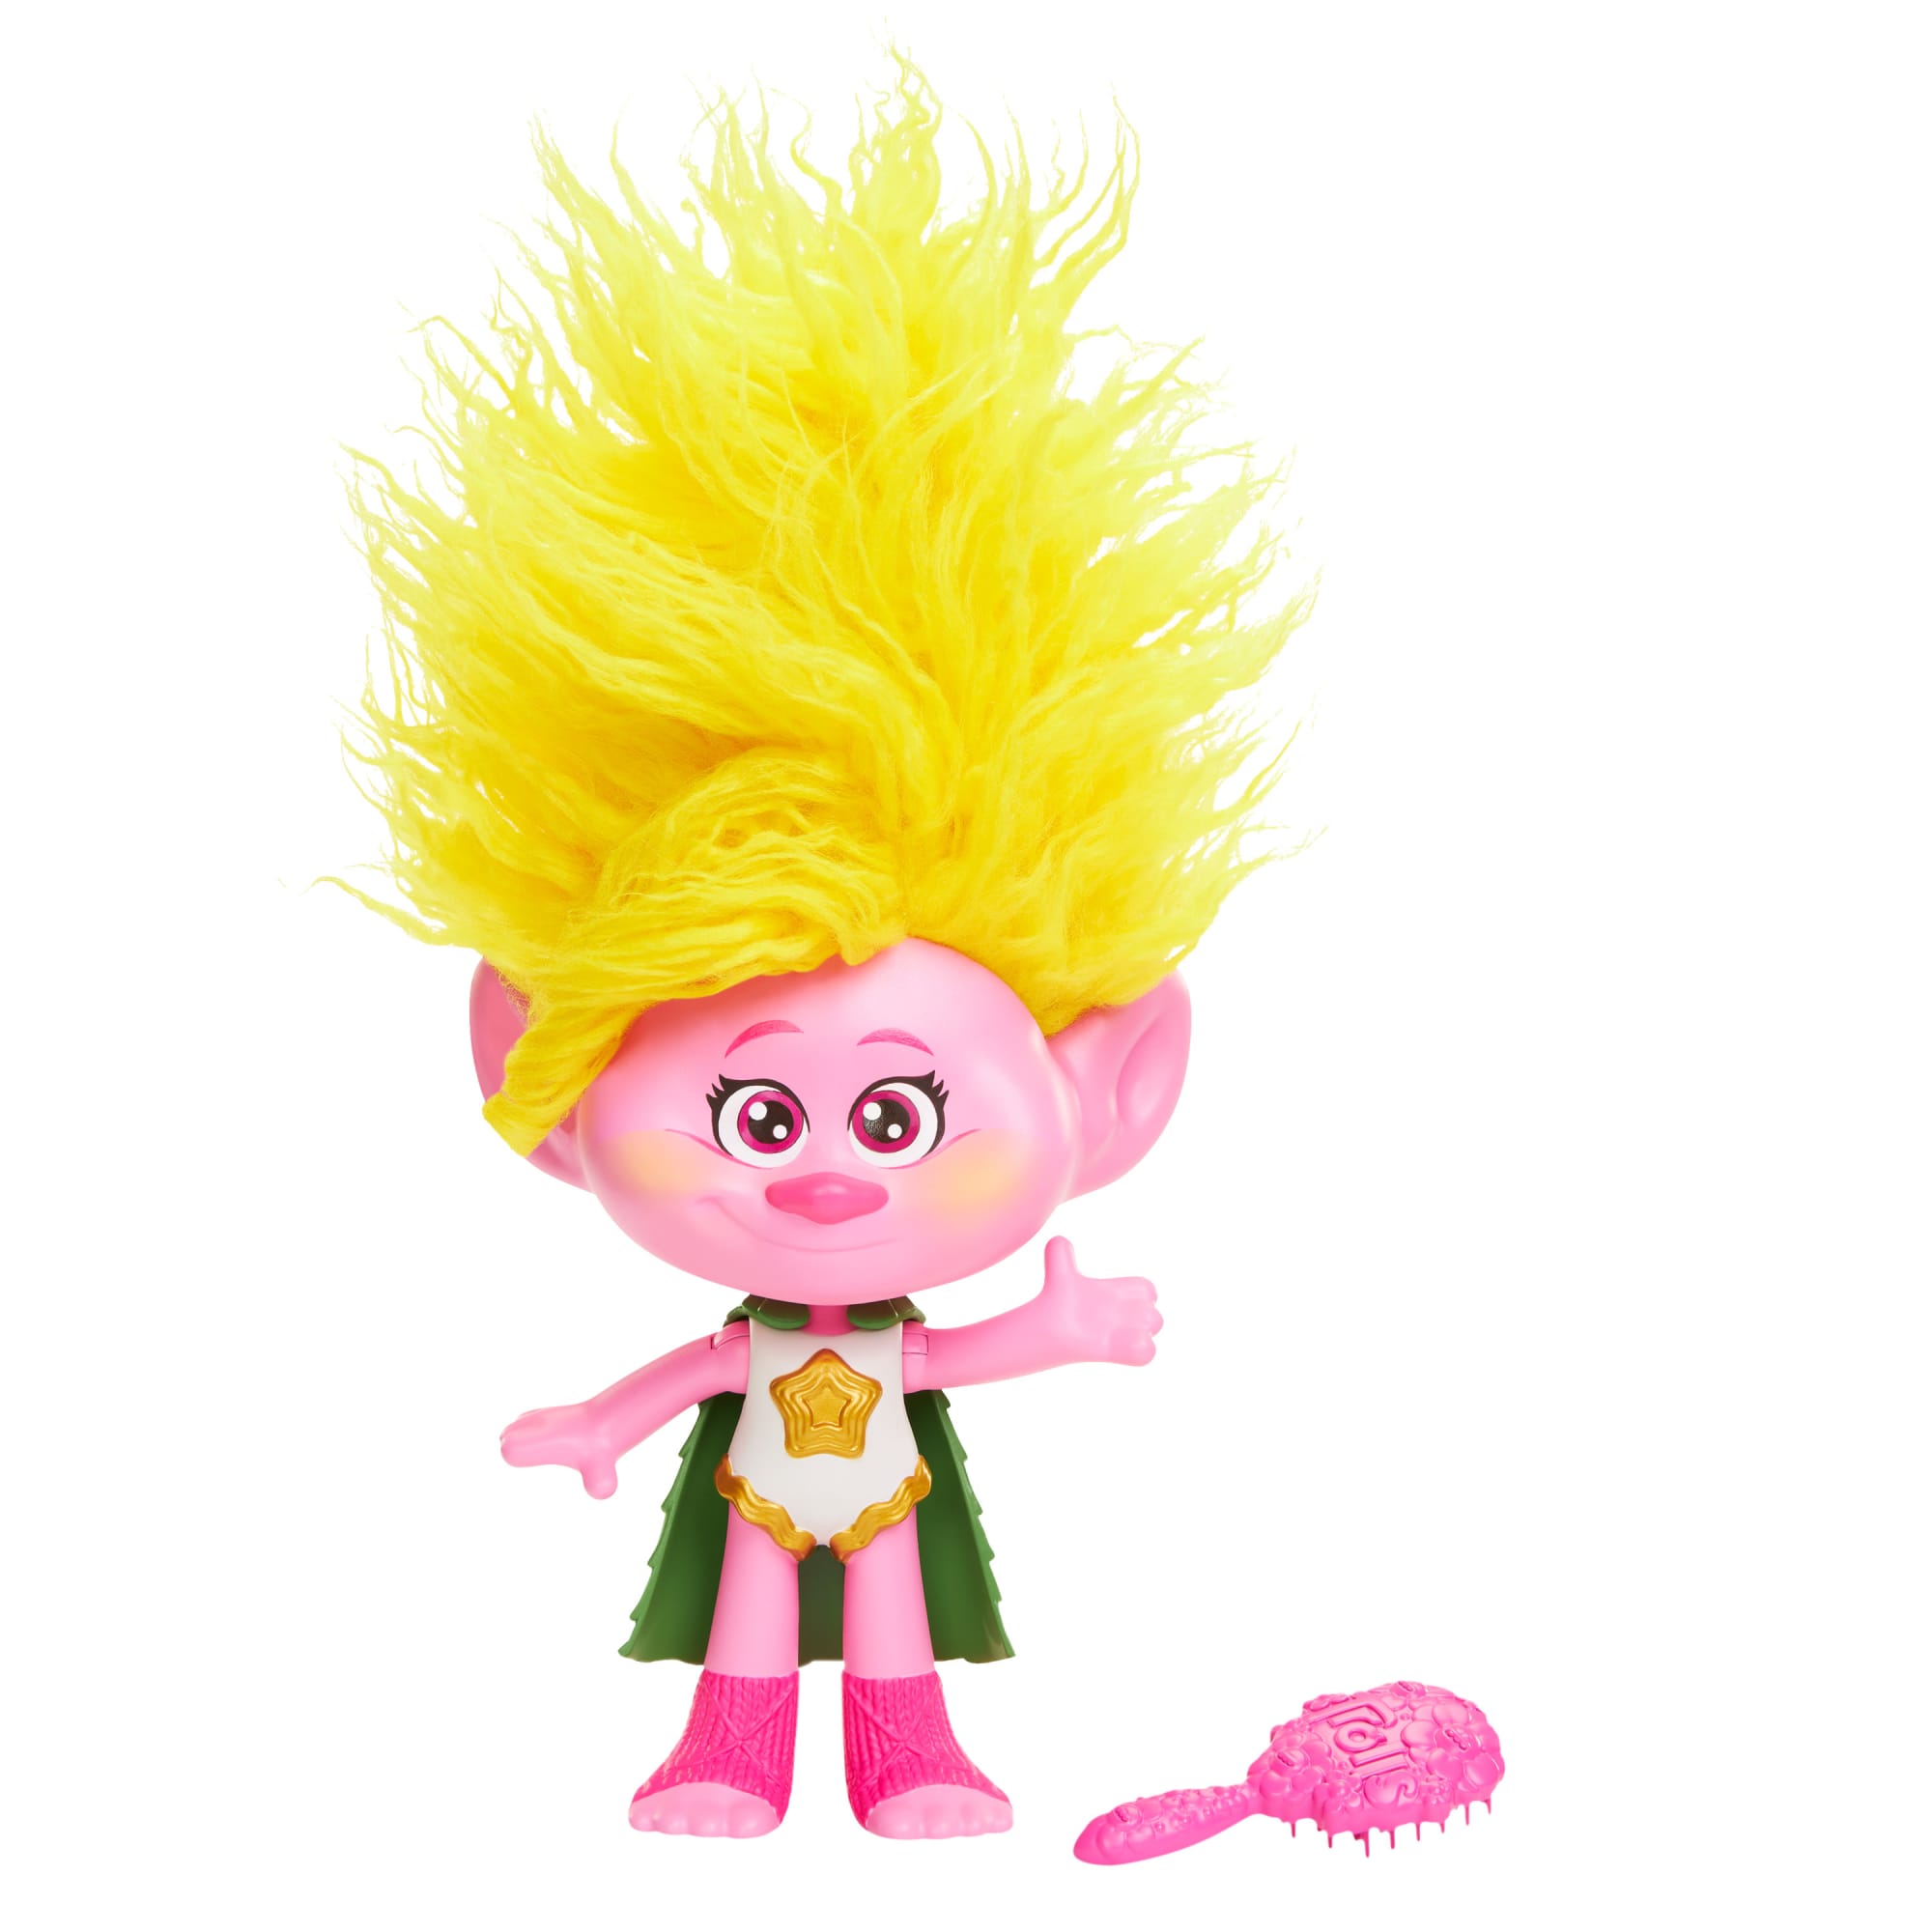 DreamWorks Trolls Band Together Hairmony Mixers™ Plush Toys with Sound,  6-inch Soft Dolls